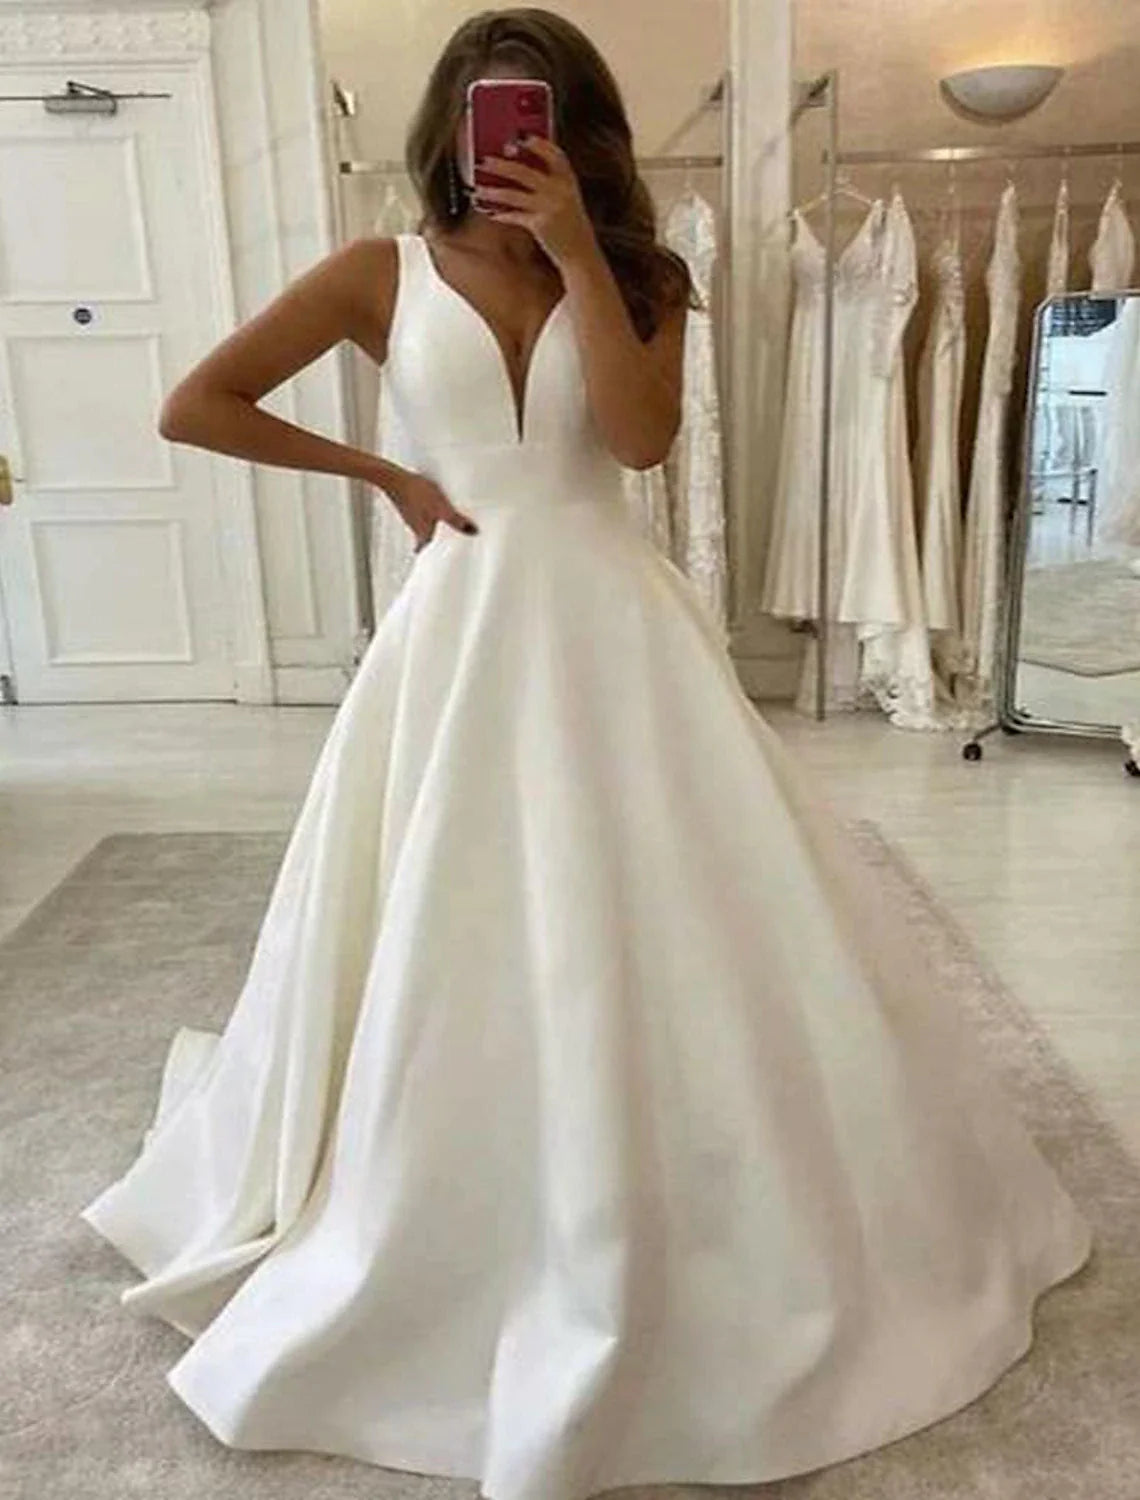 Ball Gown A-Line Evening Gown Princess Dress Engagement Court Train Sleeveless Jewel Neck Detachable Satin Backless with Bow(s)